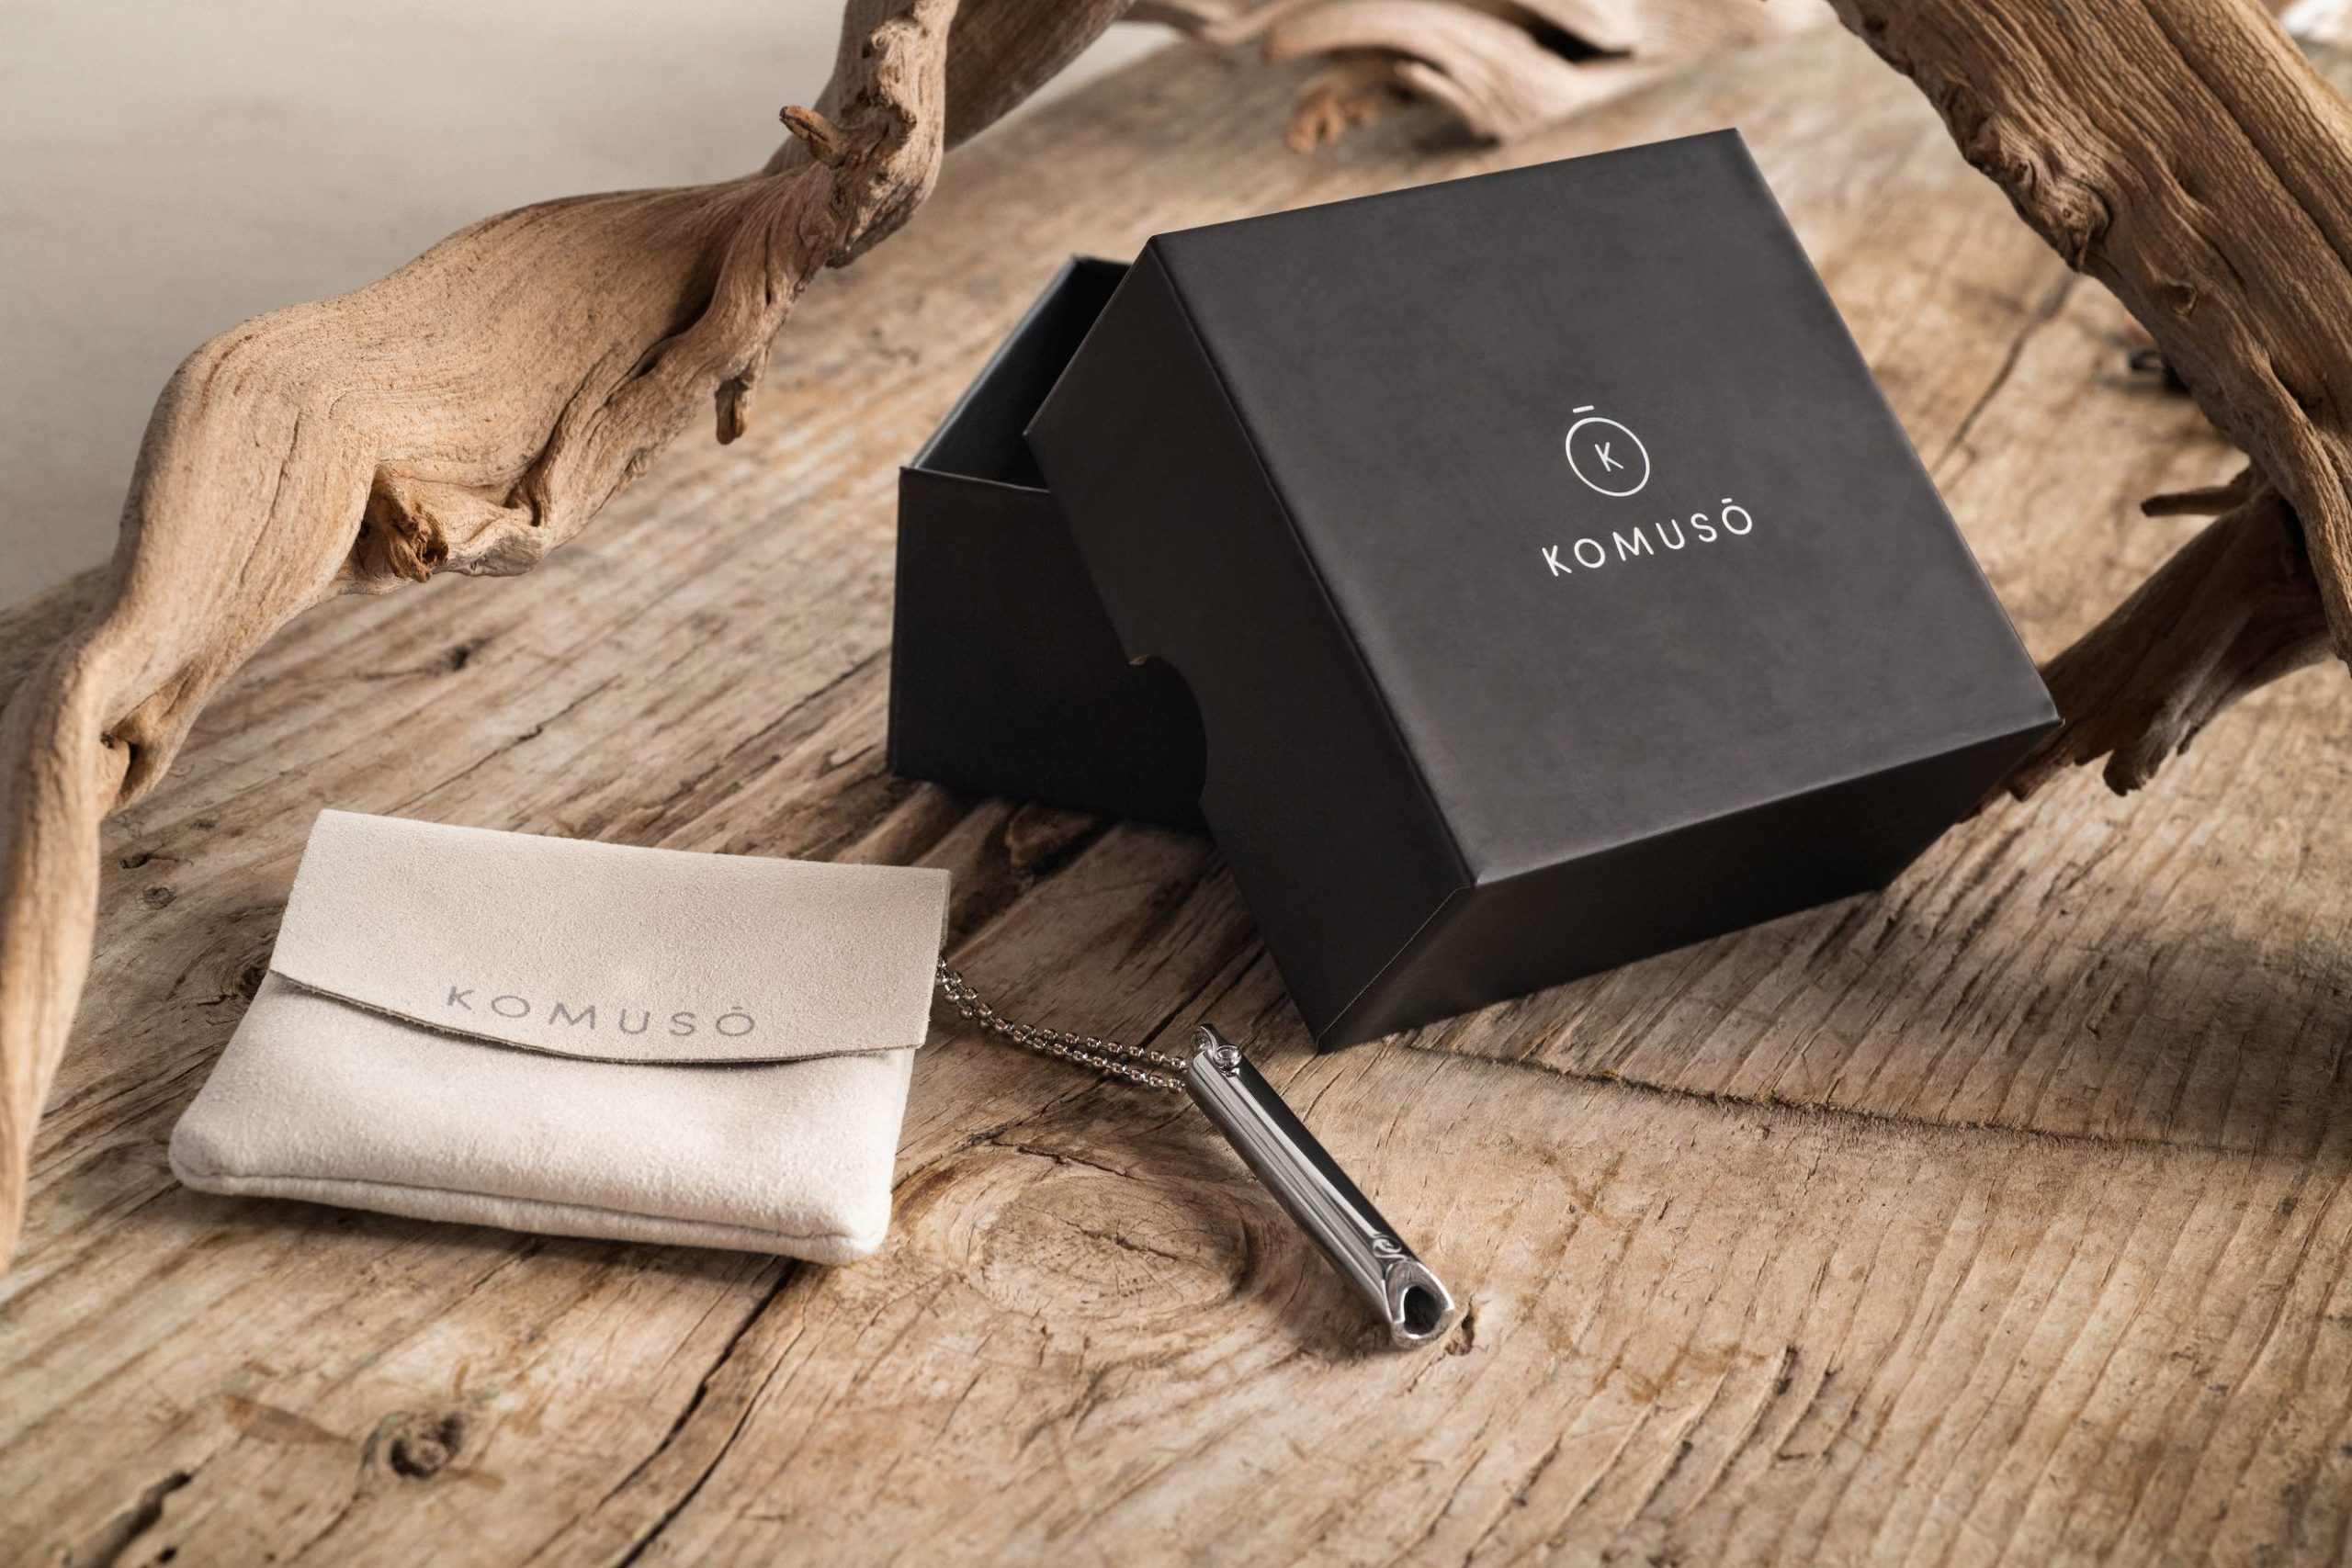 Komuso Design Photography Display of silver colored whistle, beige pouch and black box on a wooden table